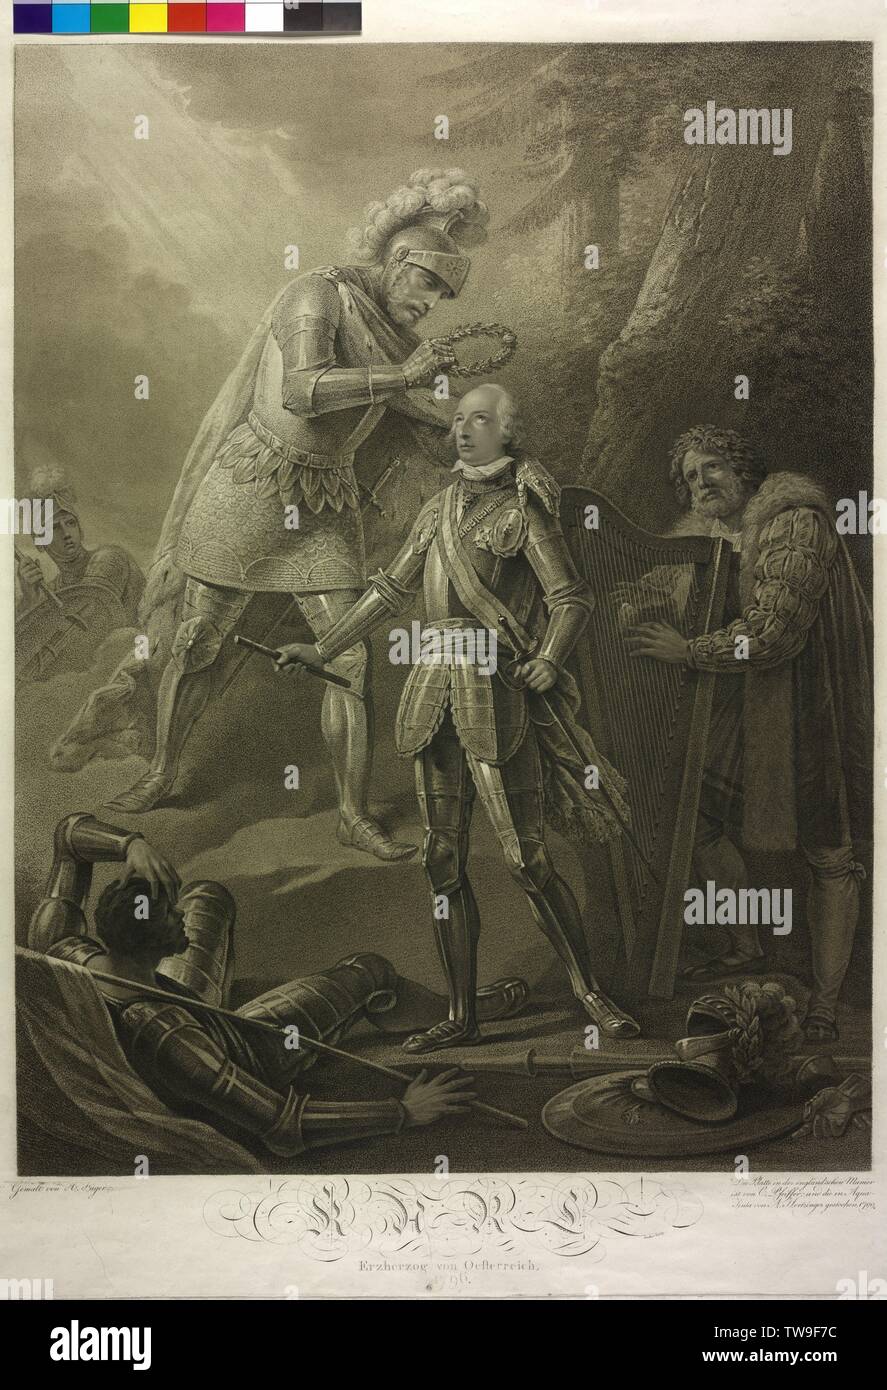 Karl Archduke of Austria, 1796, apotheosis: King Rudolf I of Habsburg crowned Archduke Karl. stipple engraving / aquatint by Karl Hermann Pfeiffer together with Anton Herzinger based on a painting by Henry Fueger. script engraved by Junker illustrated person key page Pk 3003, 461a, Additional-Rights-Clearance-Info-Not-Available Stock Photo